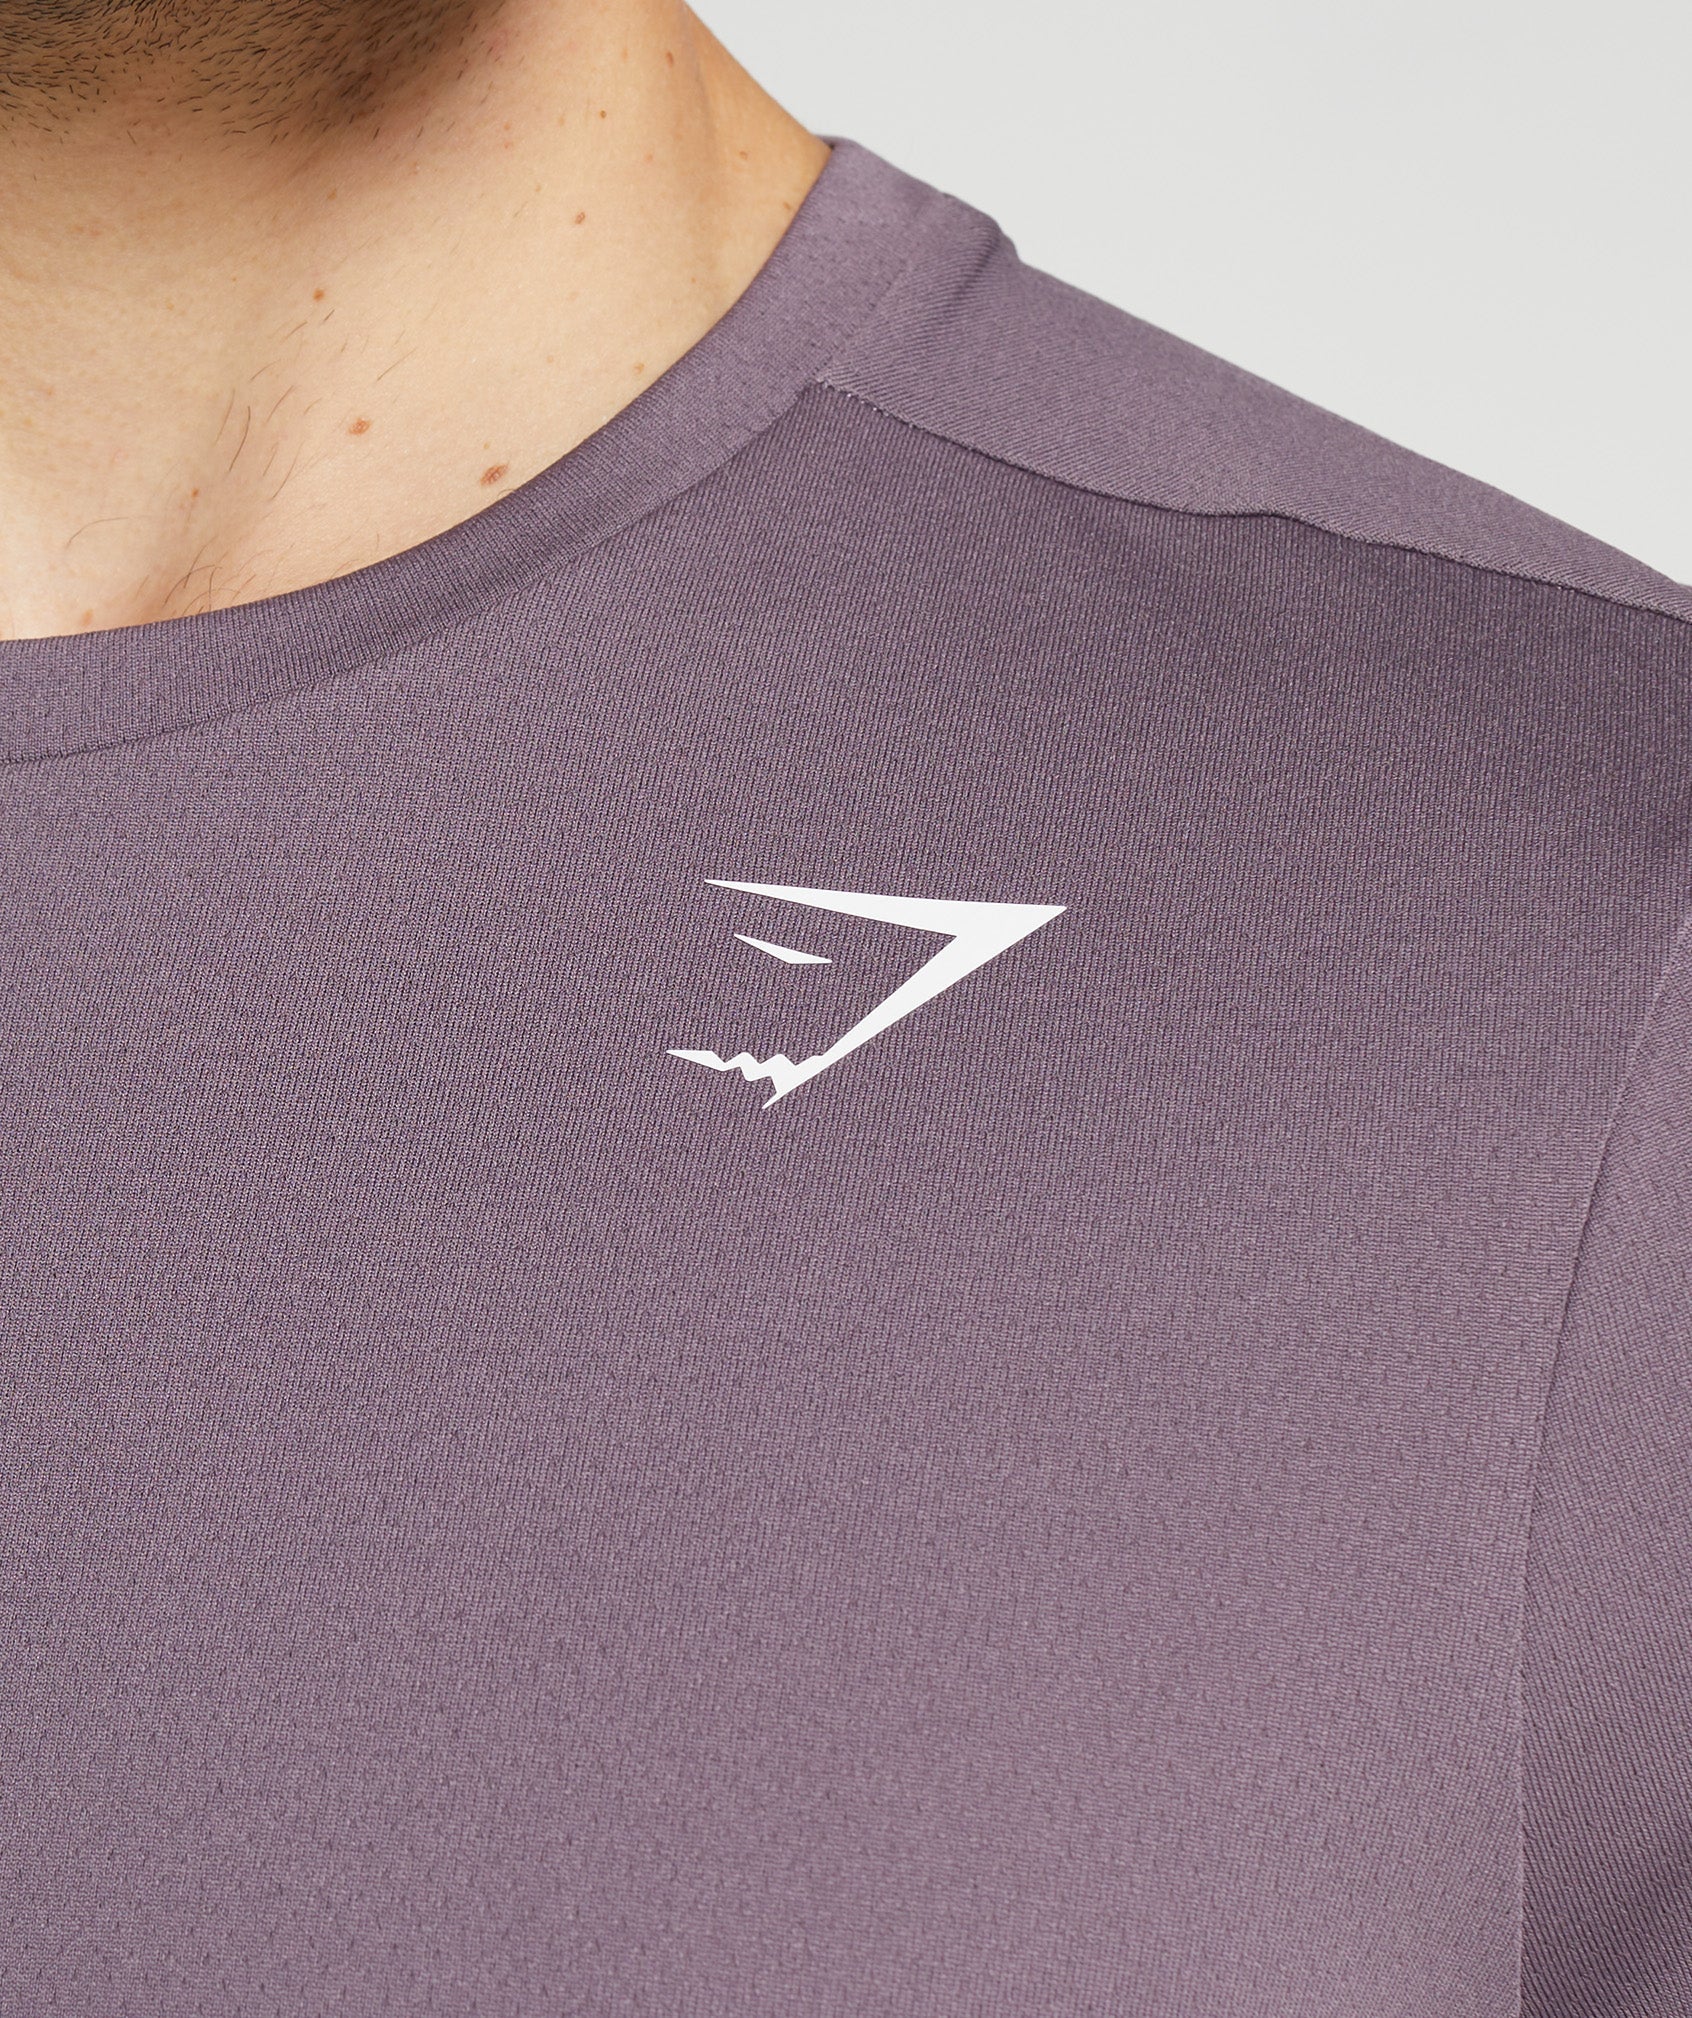 Arrival T-Shirt in Musk Lilac - view 3